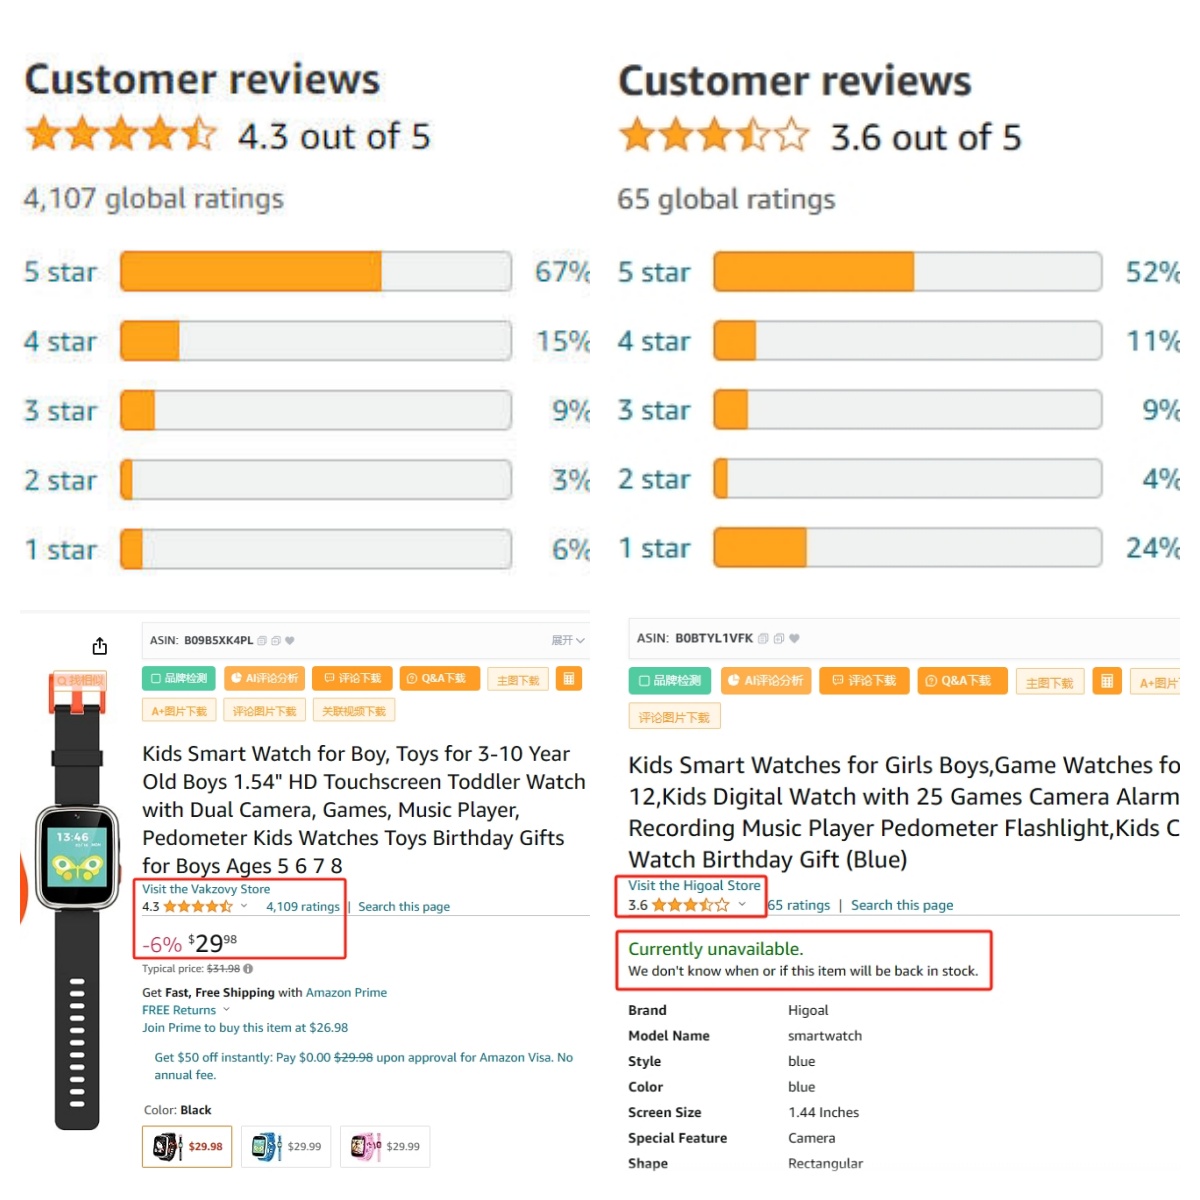 Sales results of kids smart watch from different evaluation feedback - Picture from Amazon.com